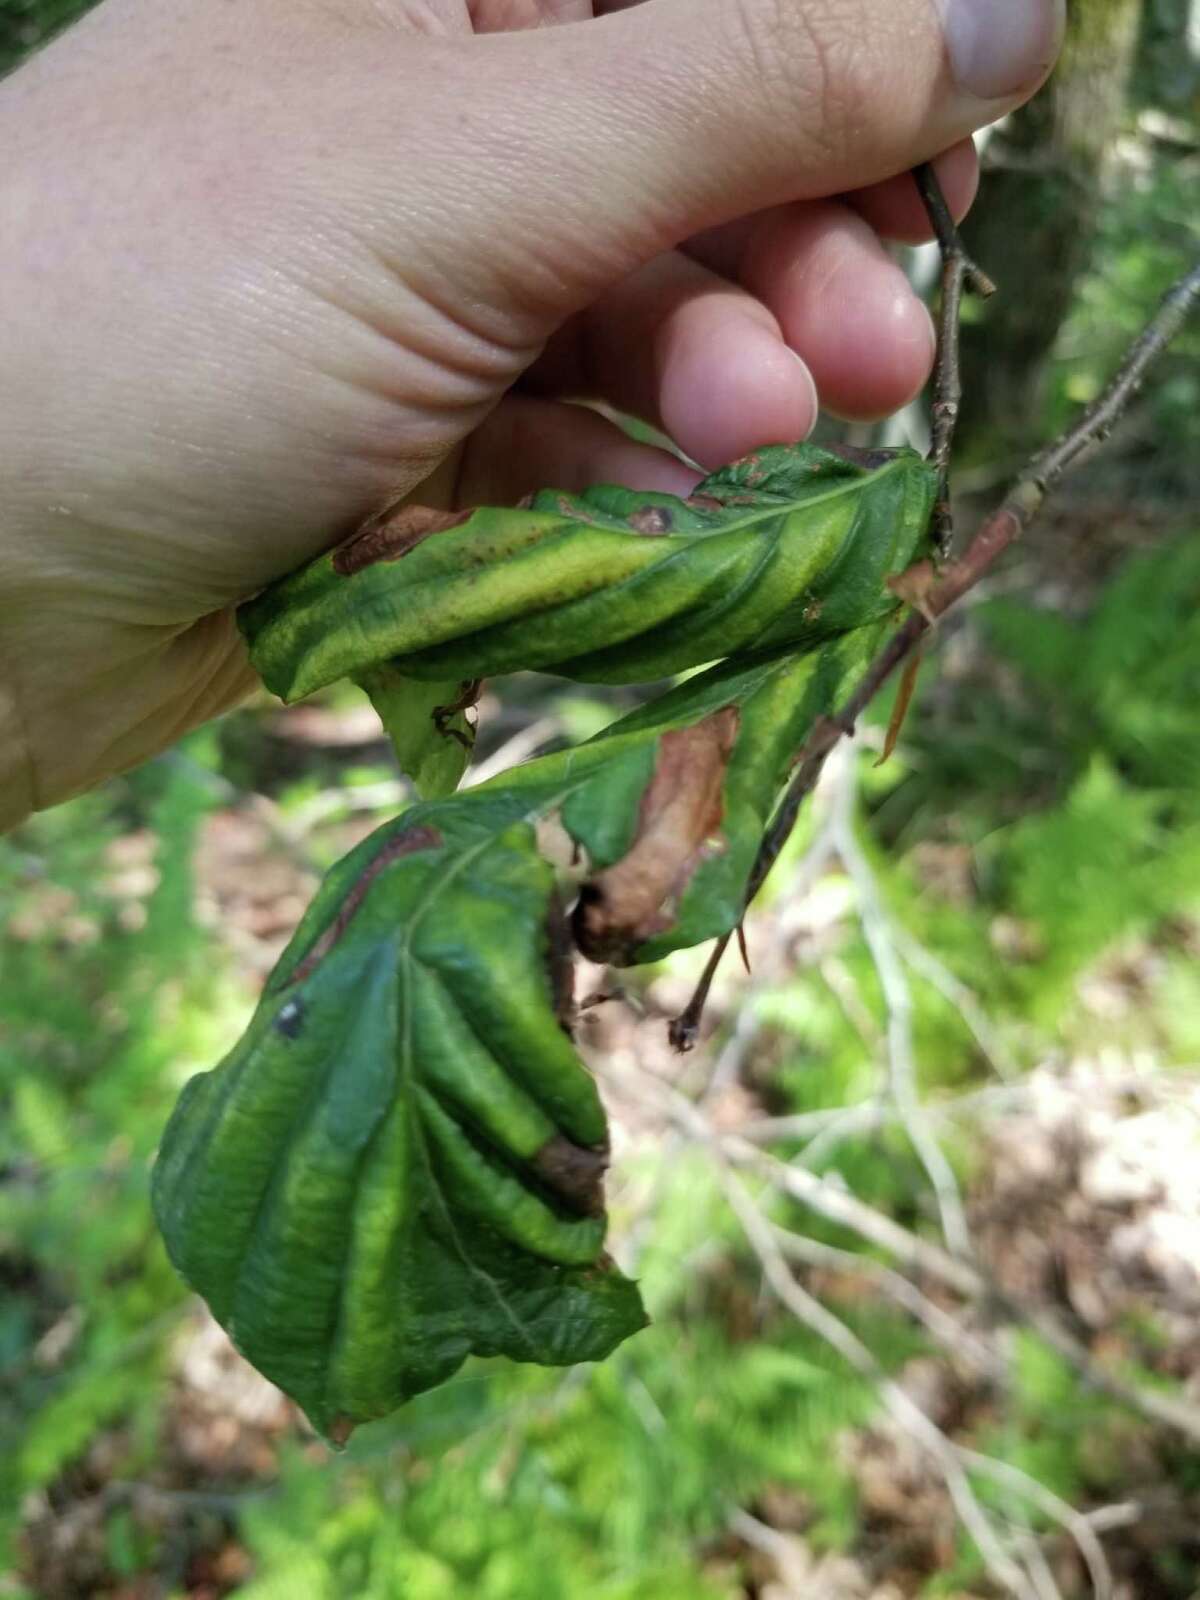 State Department of Environmental Conservation announced that Beech Leaf Disease (BLD), which affects all species of beech trees, was identified in 35 counties in New York State to date on July 15, 2022